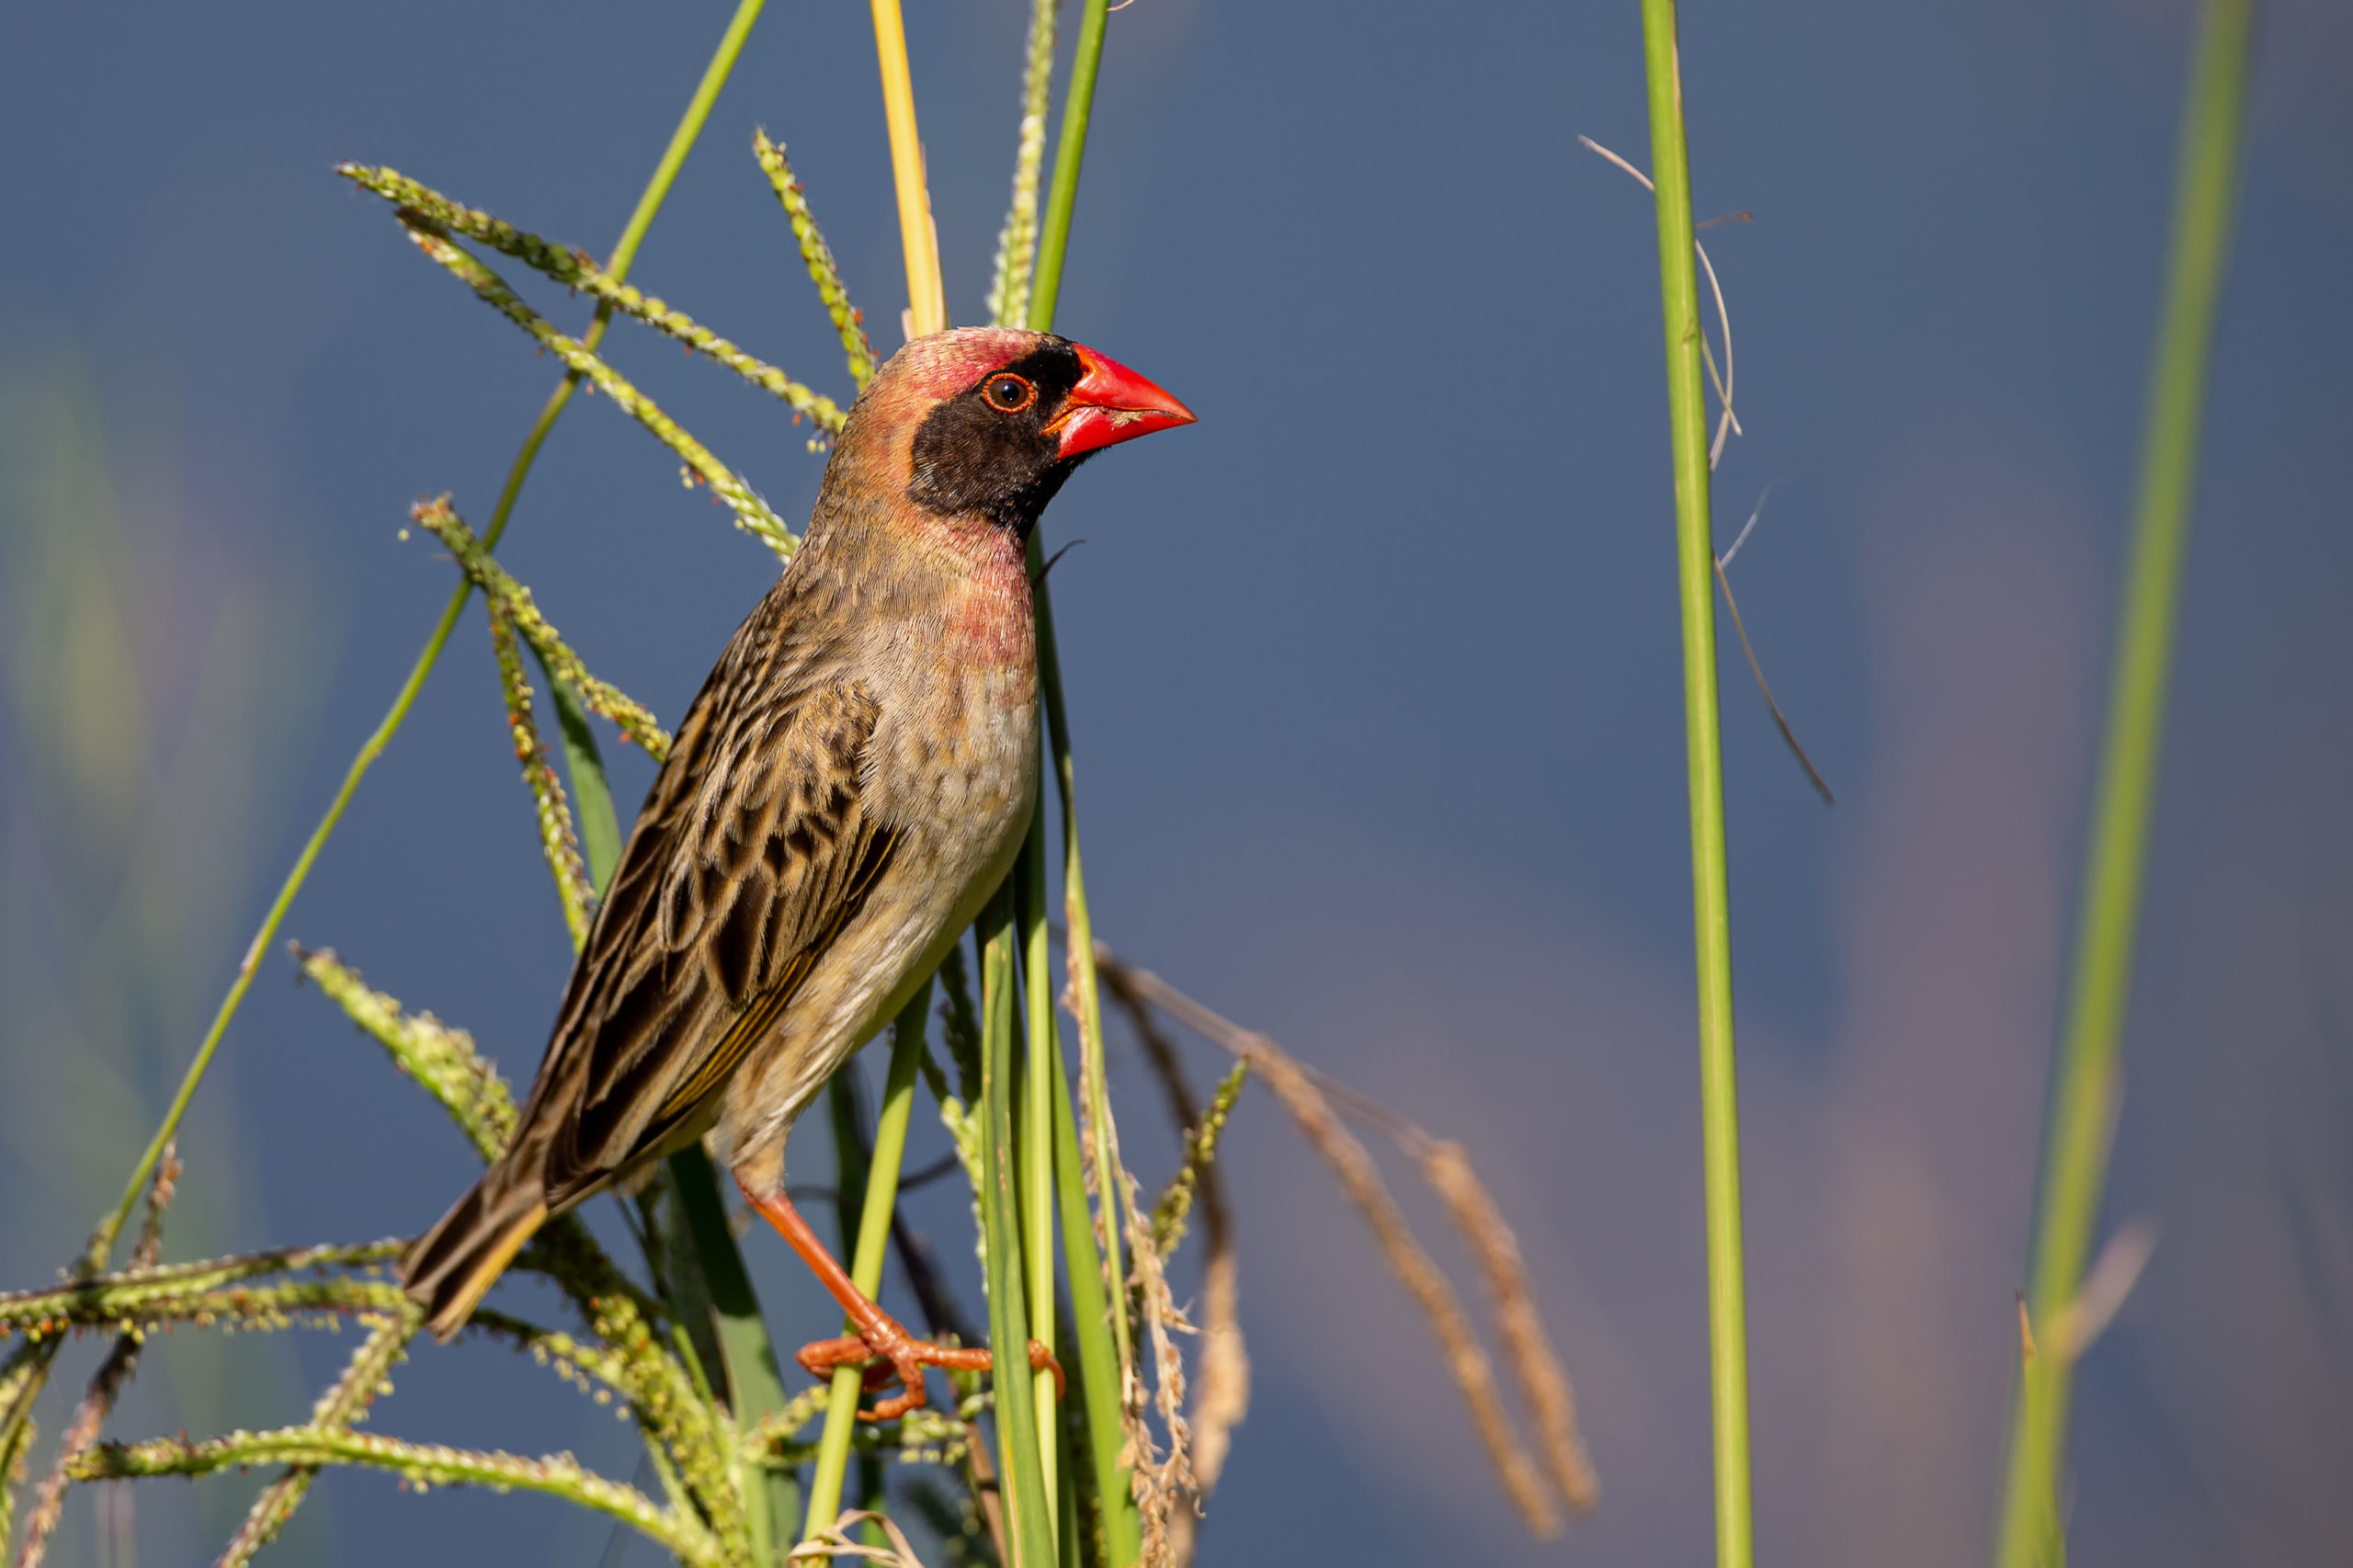 Opportunities for innovation to reduce damage caused by quelea birds in Africa